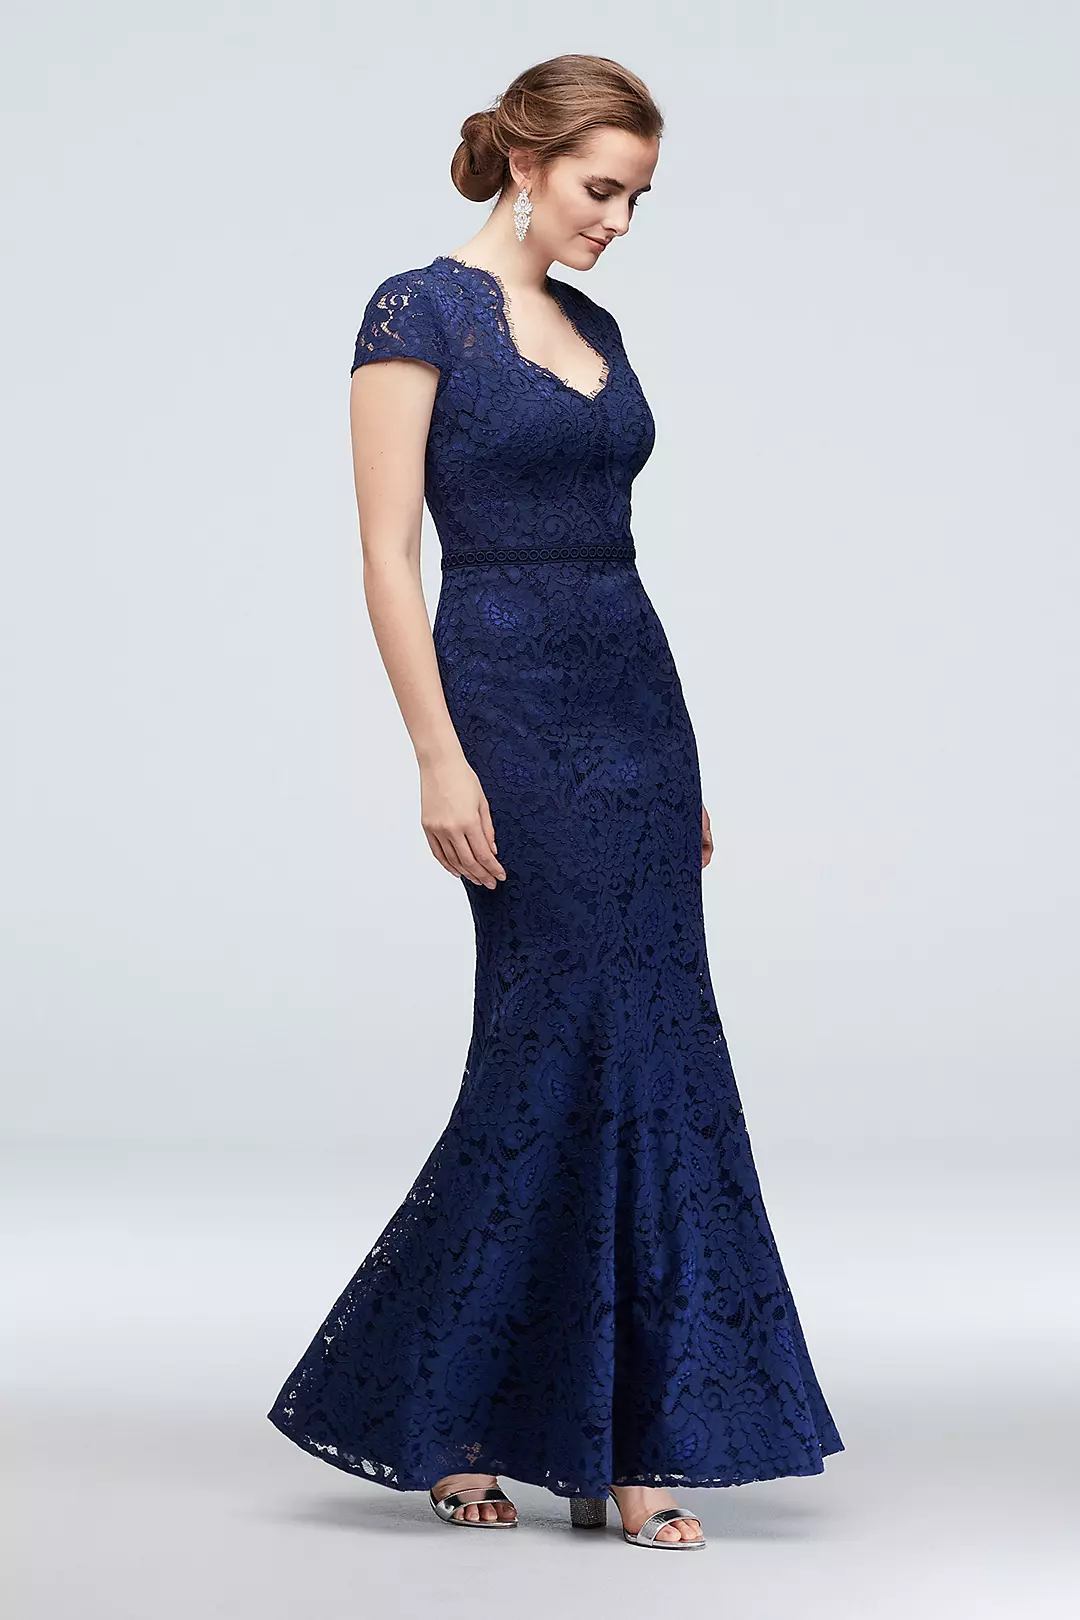 Cap Sleeve Lace Mermaid Gown with Notch Neckline Image